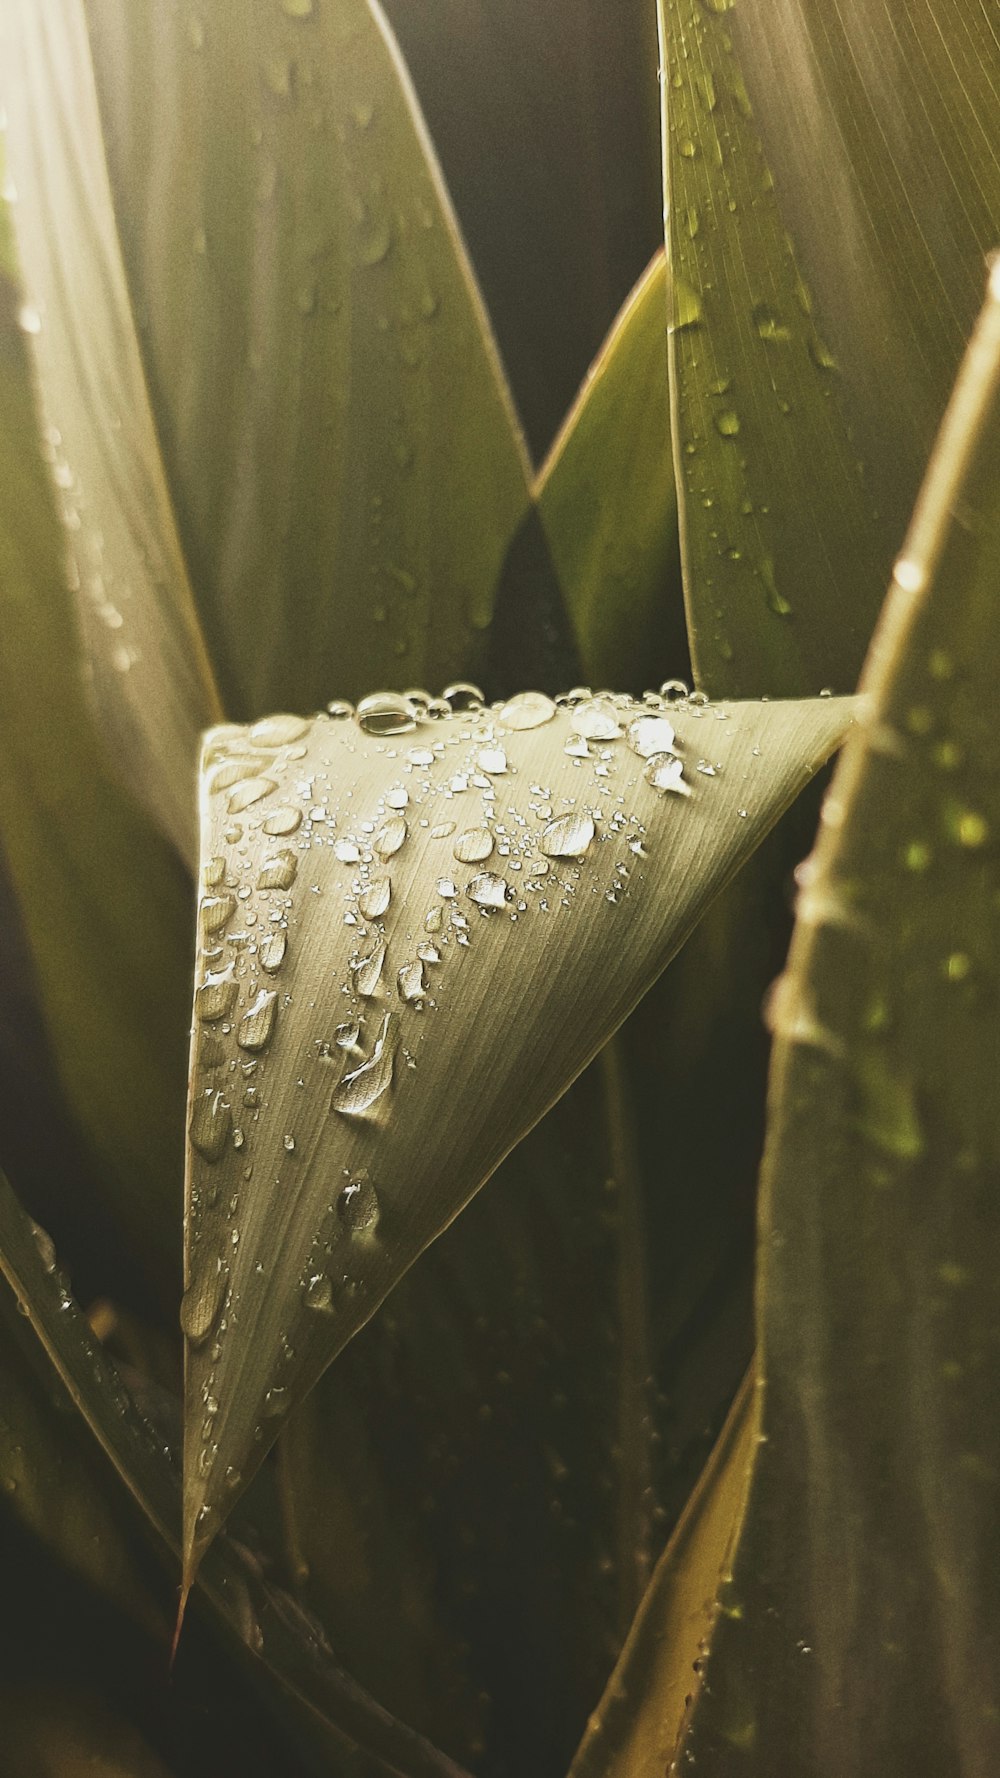 a close up of a plant with drops of water on it